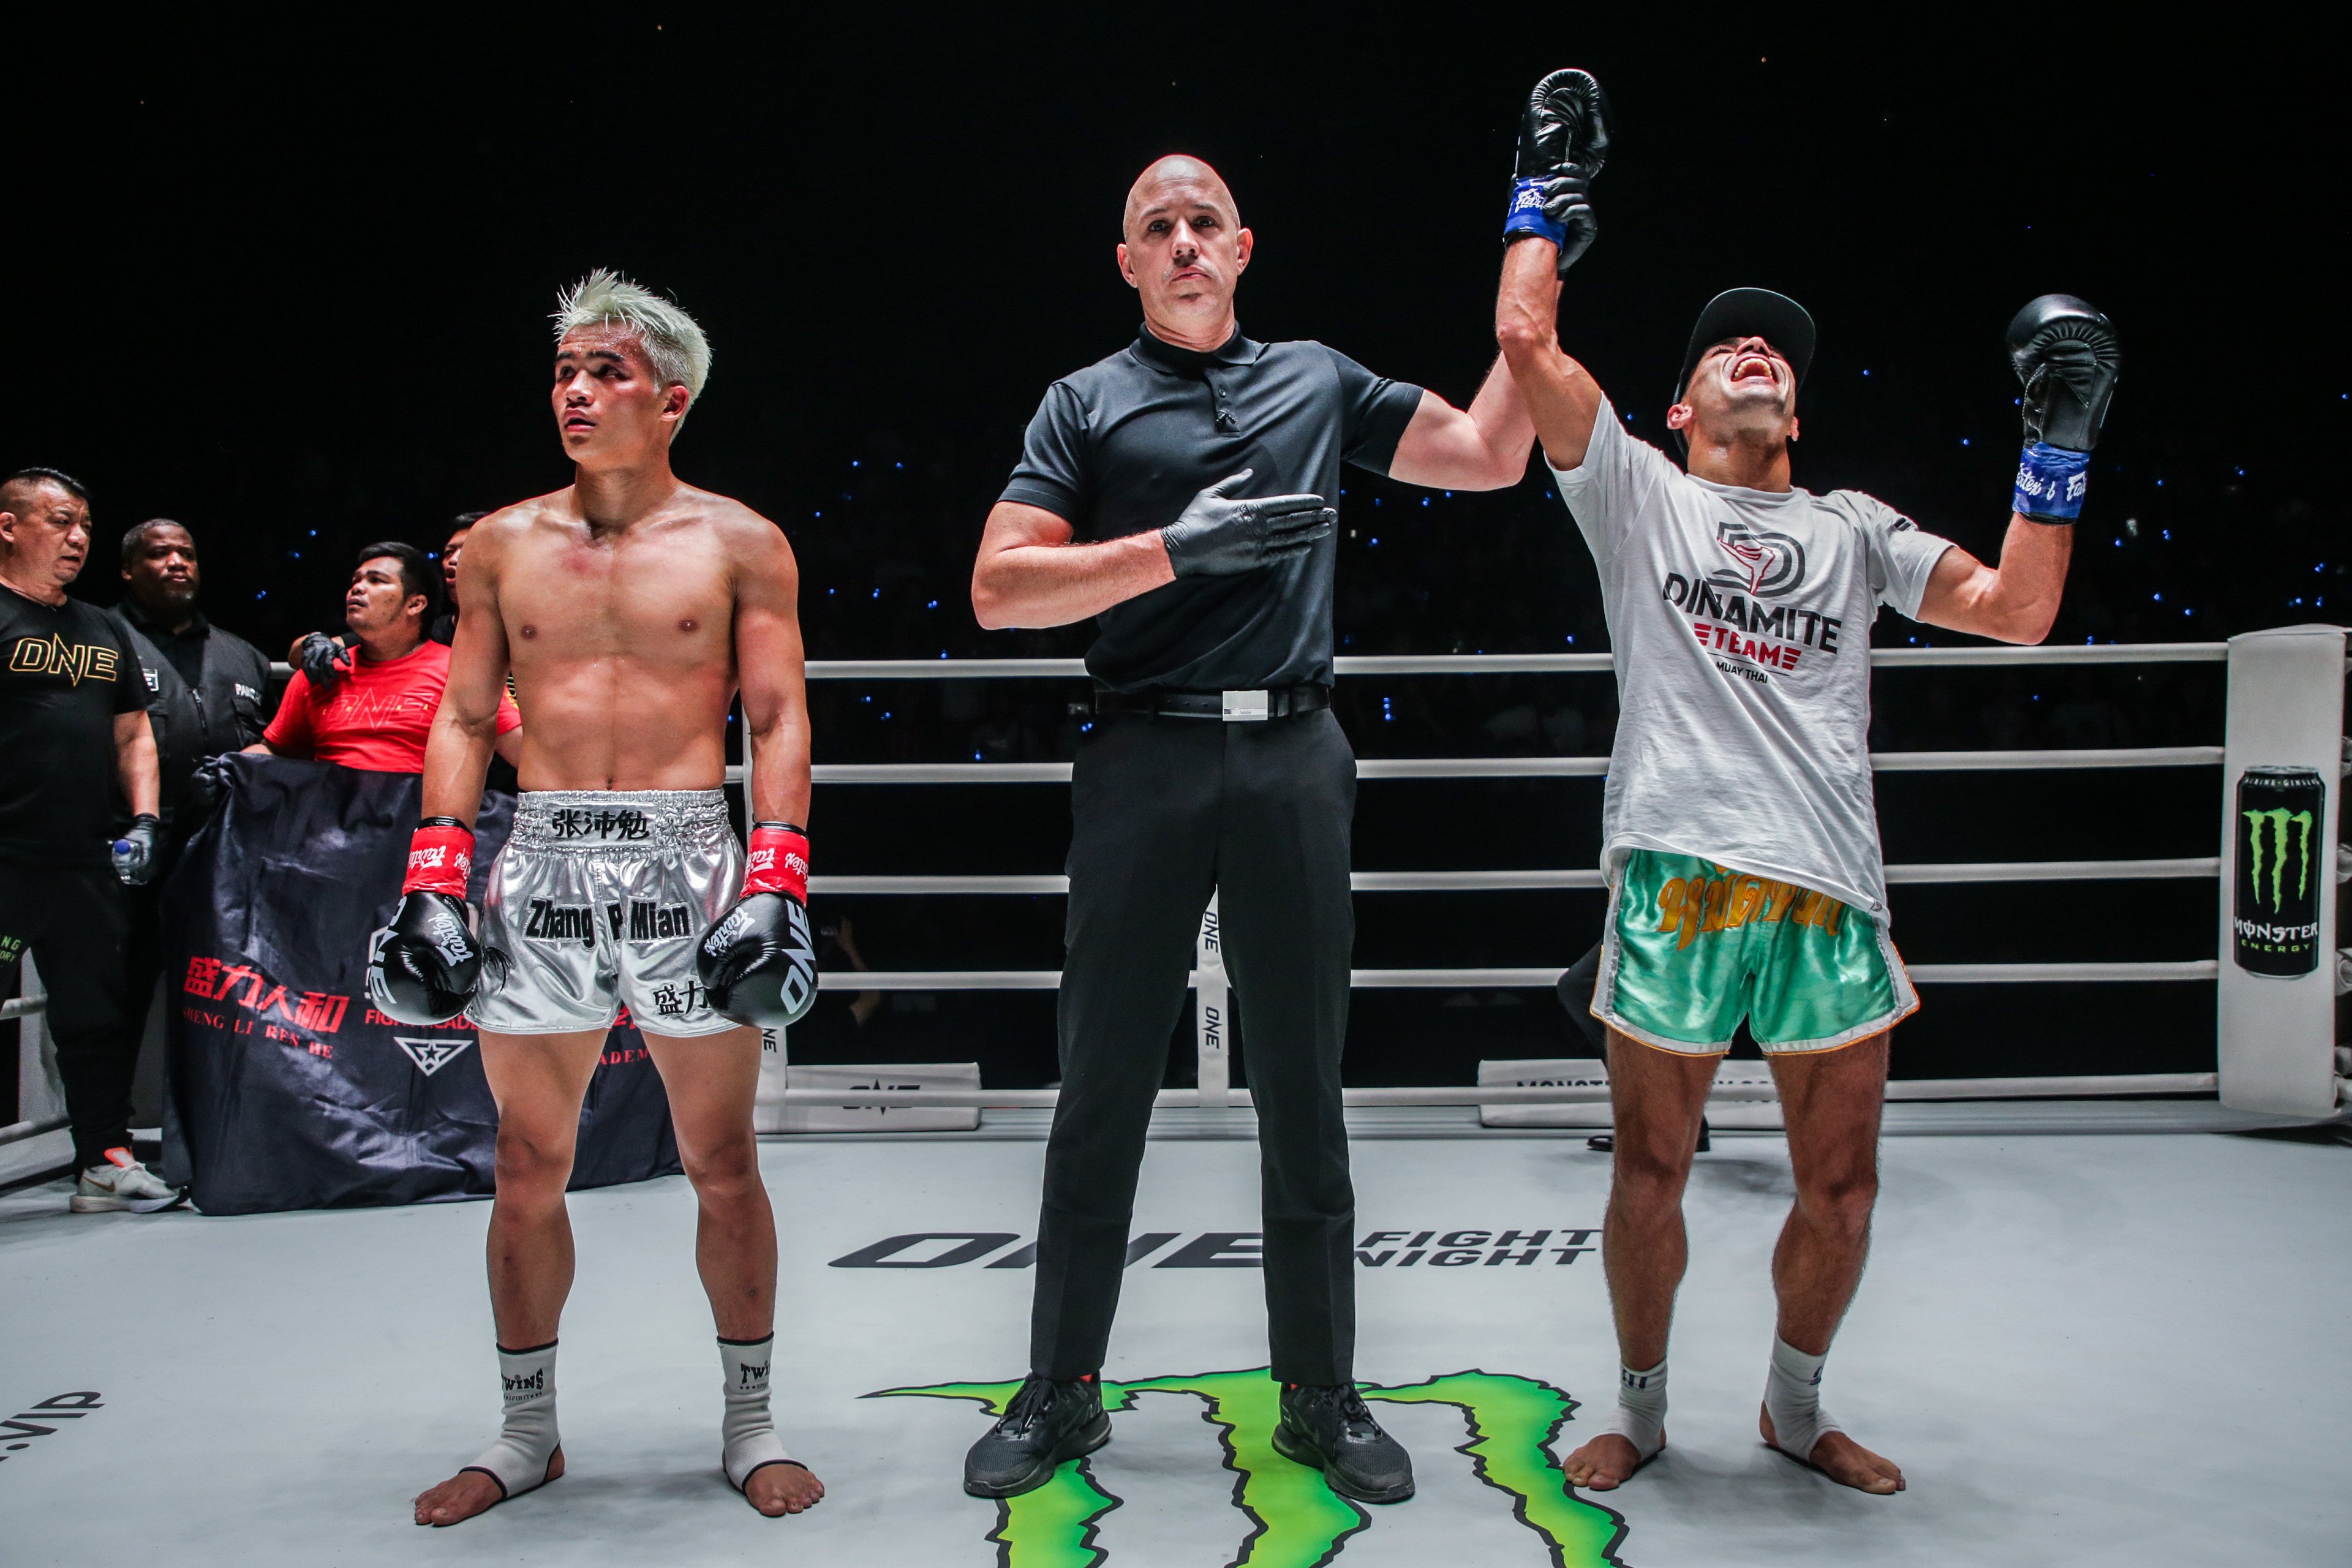 Rui Botelho celebrates after a split decision win over Zhang Peimian. Photos: ONE Championship
